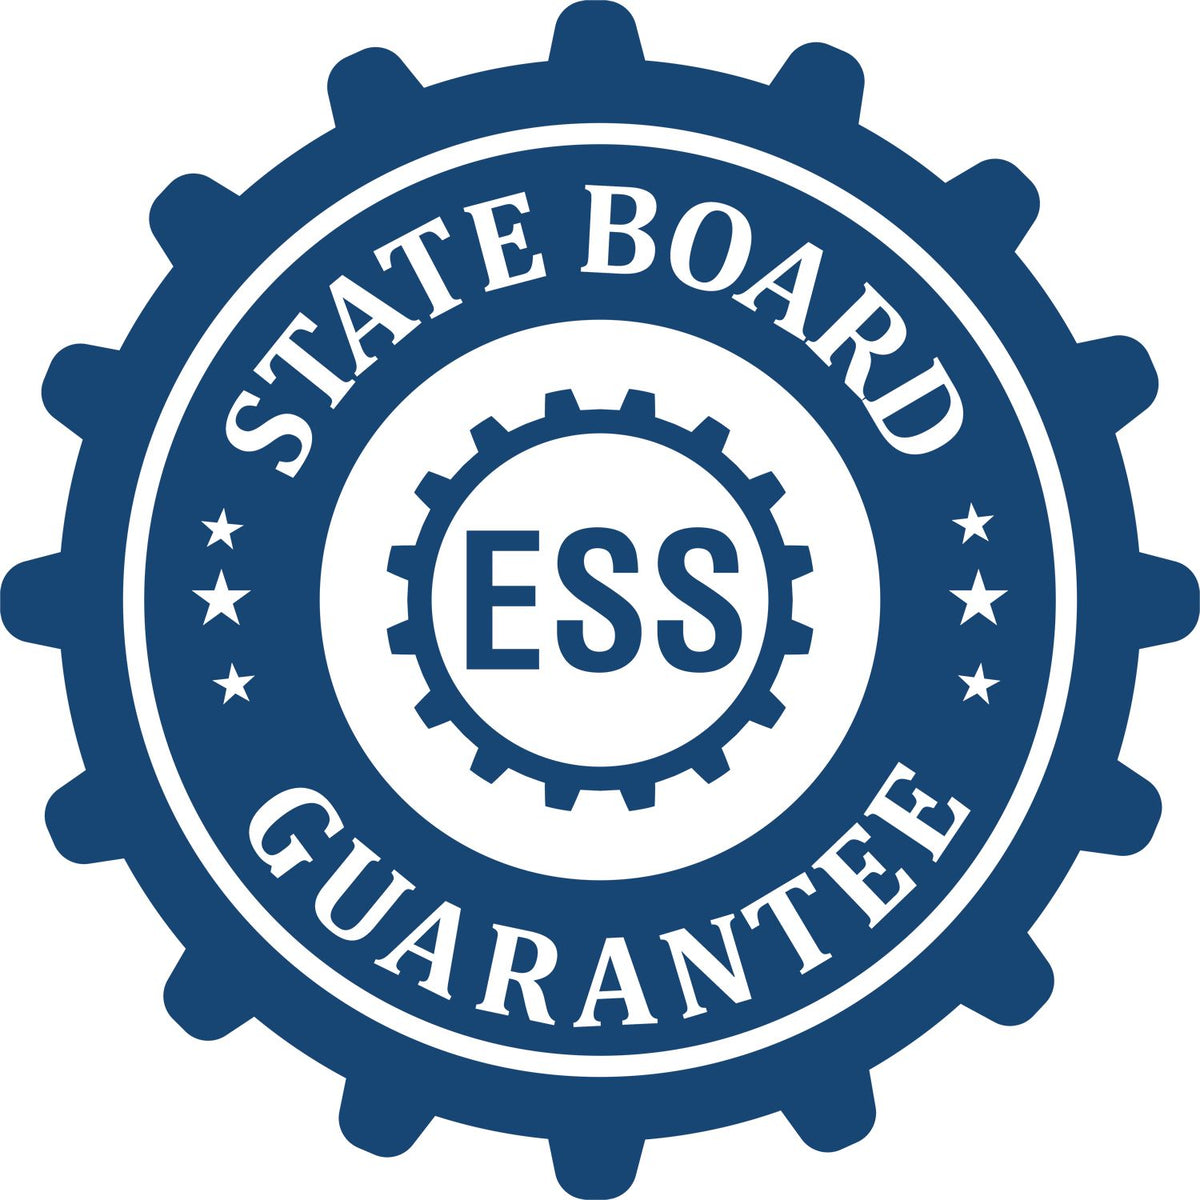 An emblem in a gear shape illustrating a state board guarantee for the Hybrid Delaware Geologist Seal